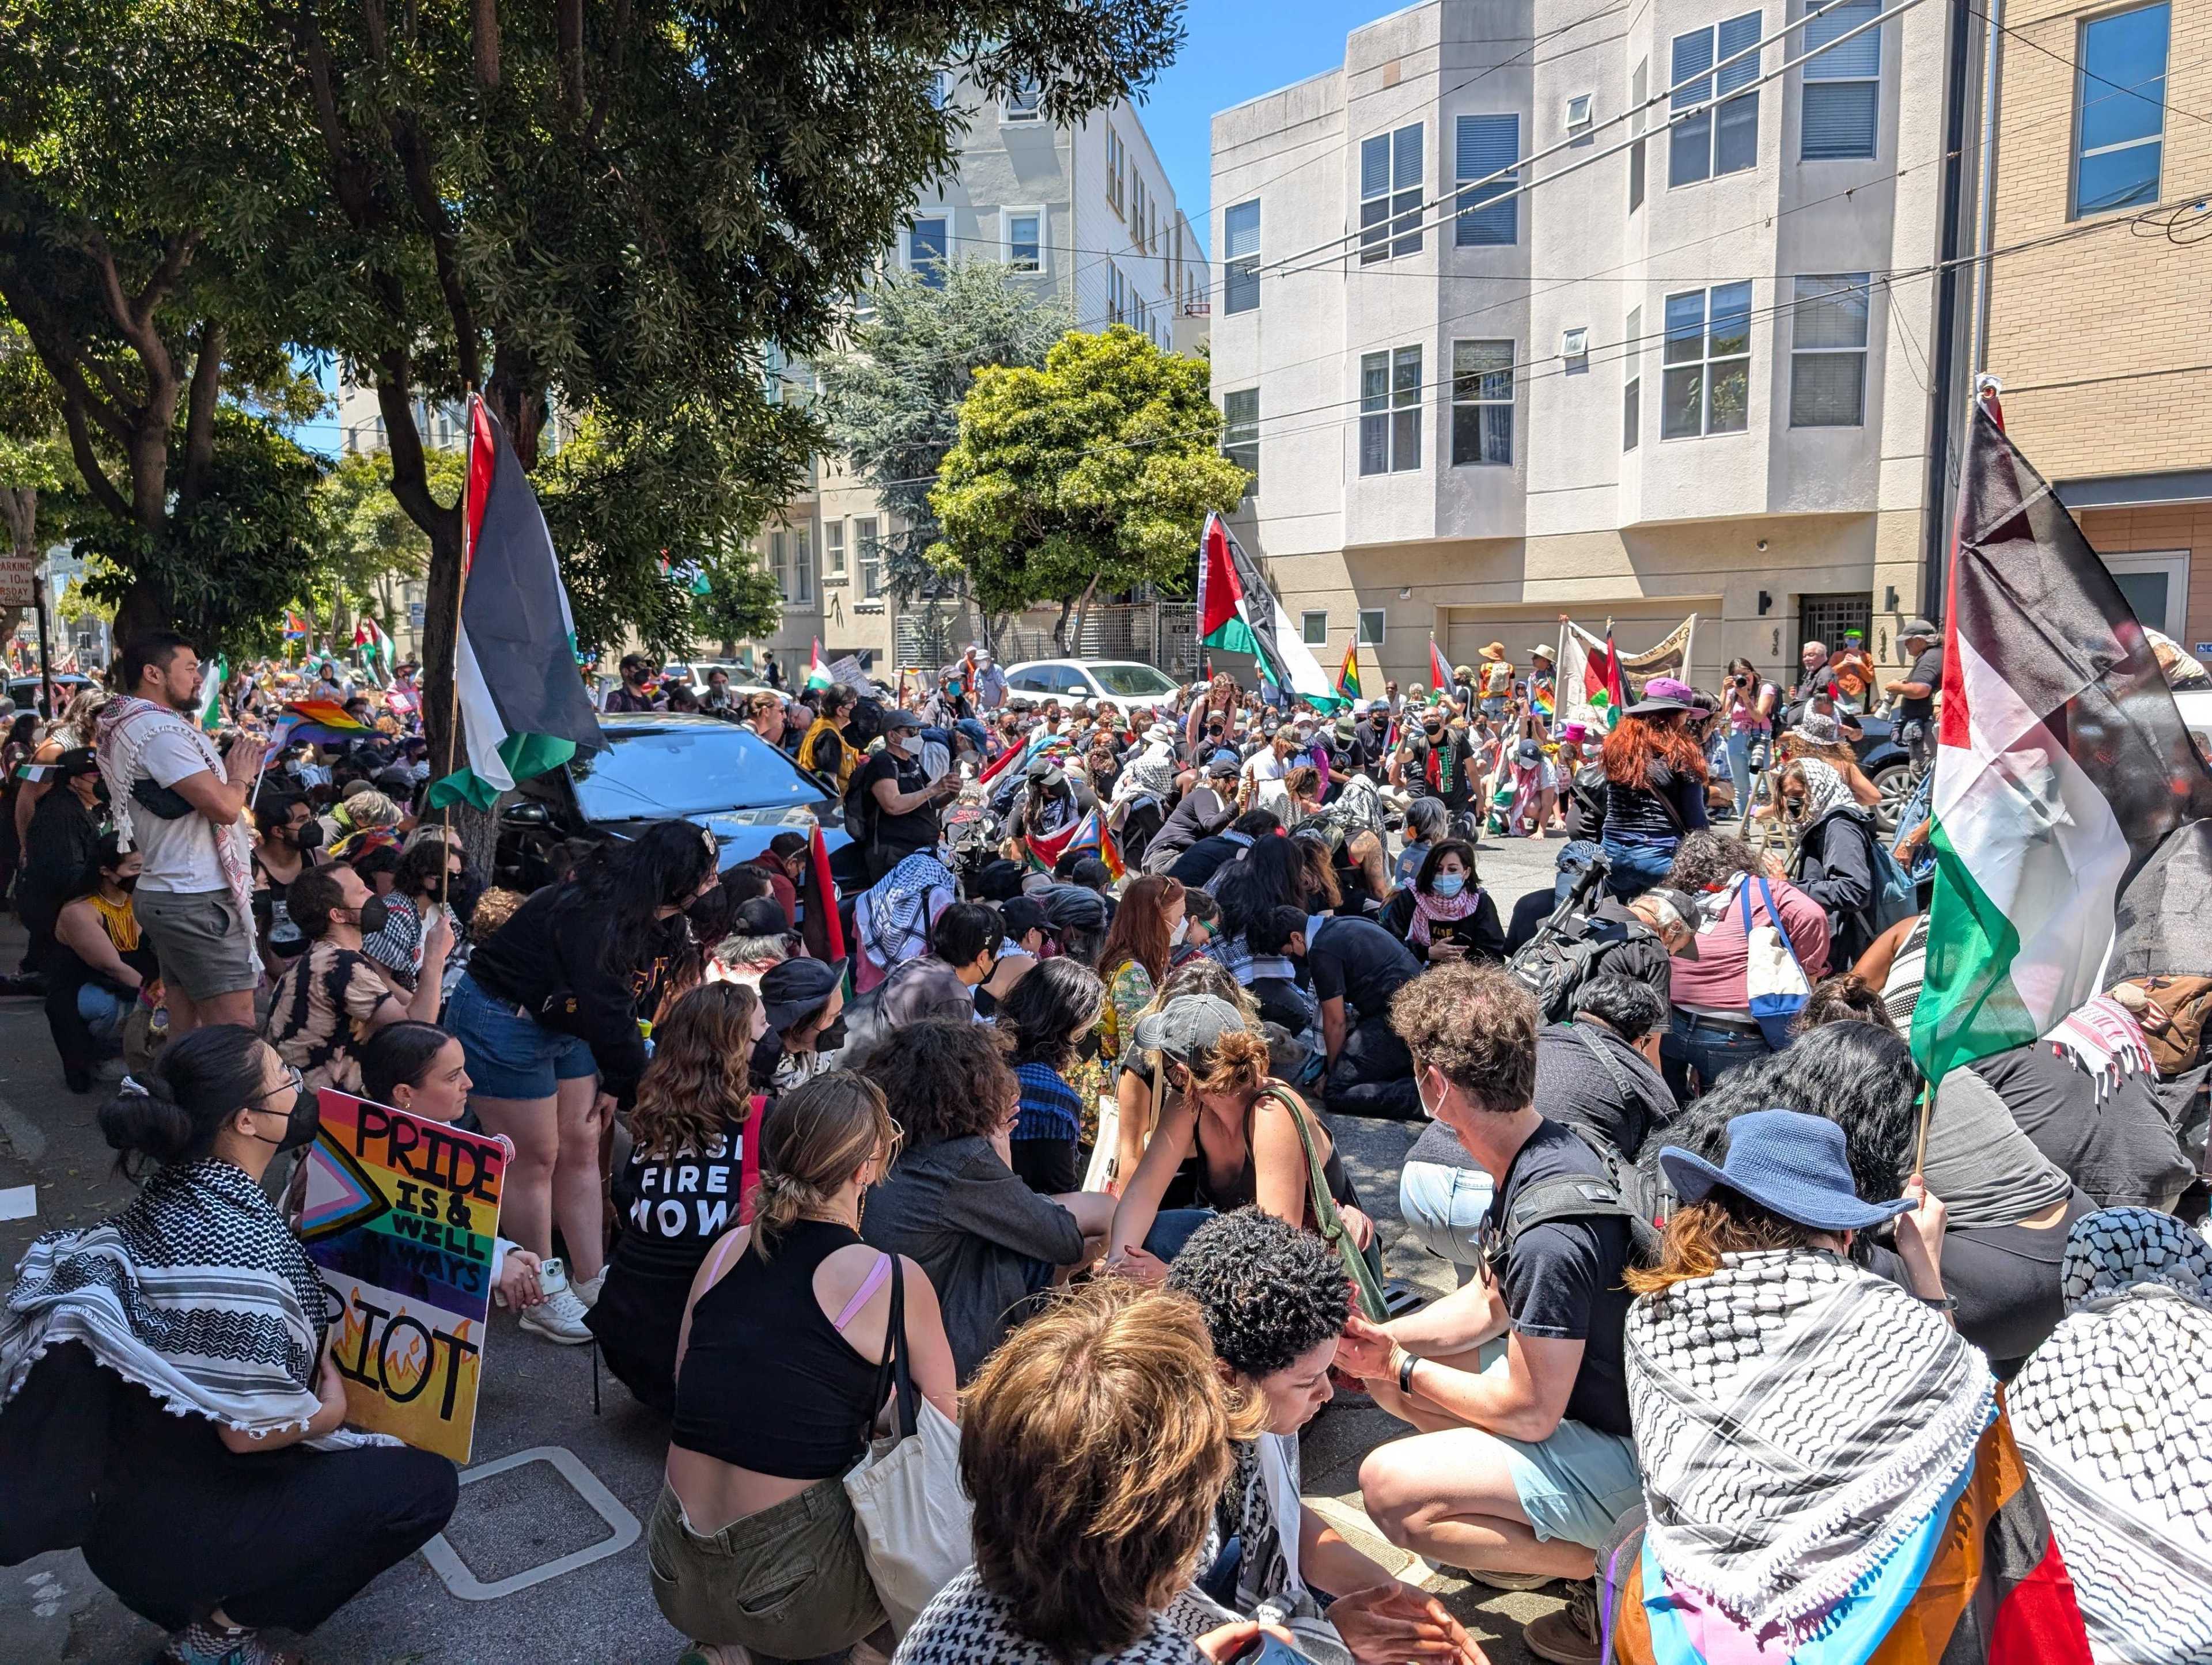 A large group of people, some holding Palestinian flags, gathers and sits on a street, with signs and banners advocating various causes. Trees and buildings are in the background.